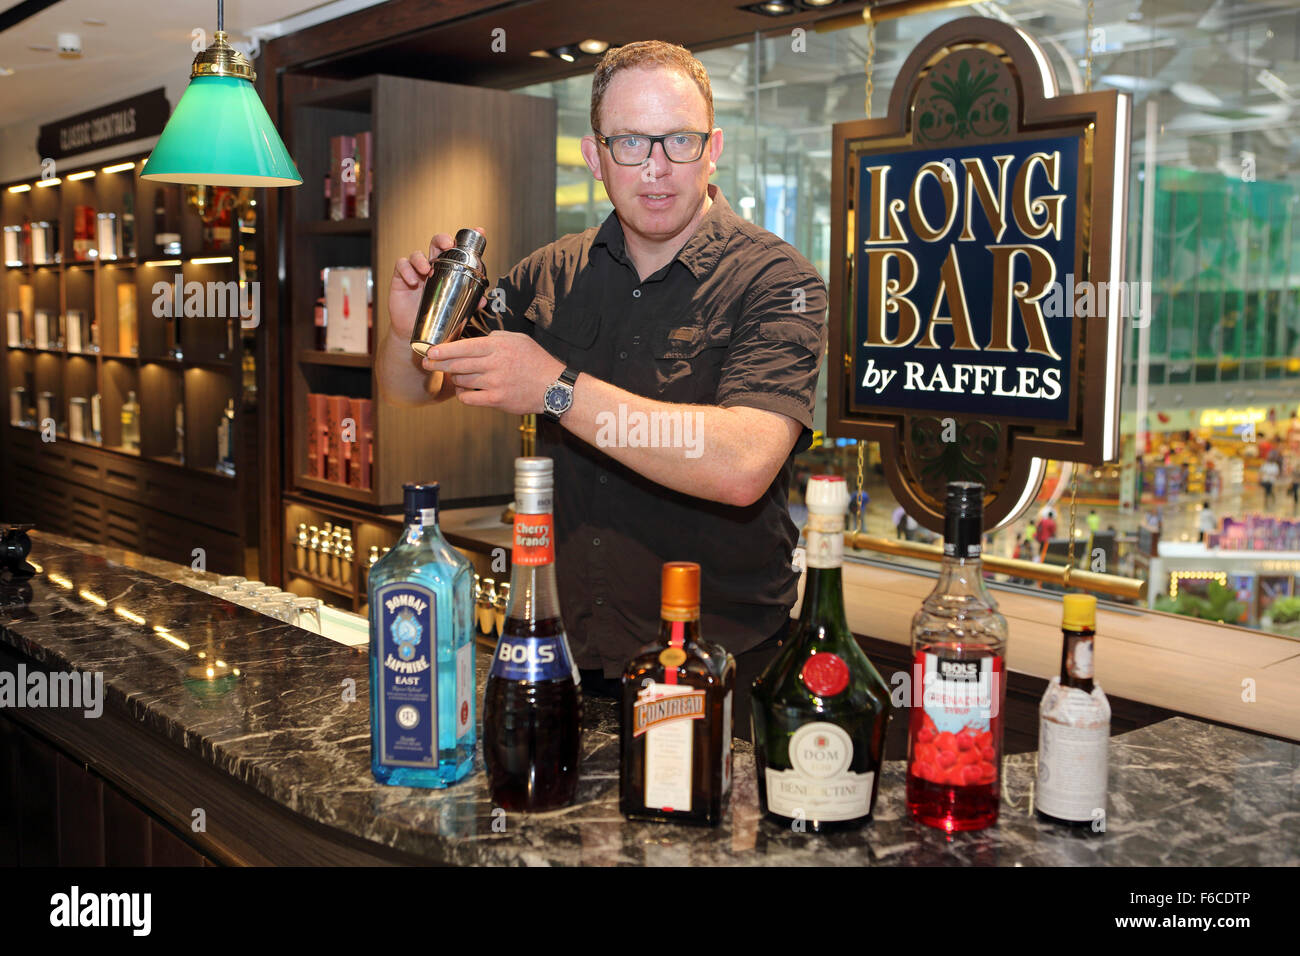 A man mixes a Singapore Sling cocktail at the Long Bar by Raffles at Changi International Airport in Singapore. Raffles is assoc Stock Photo